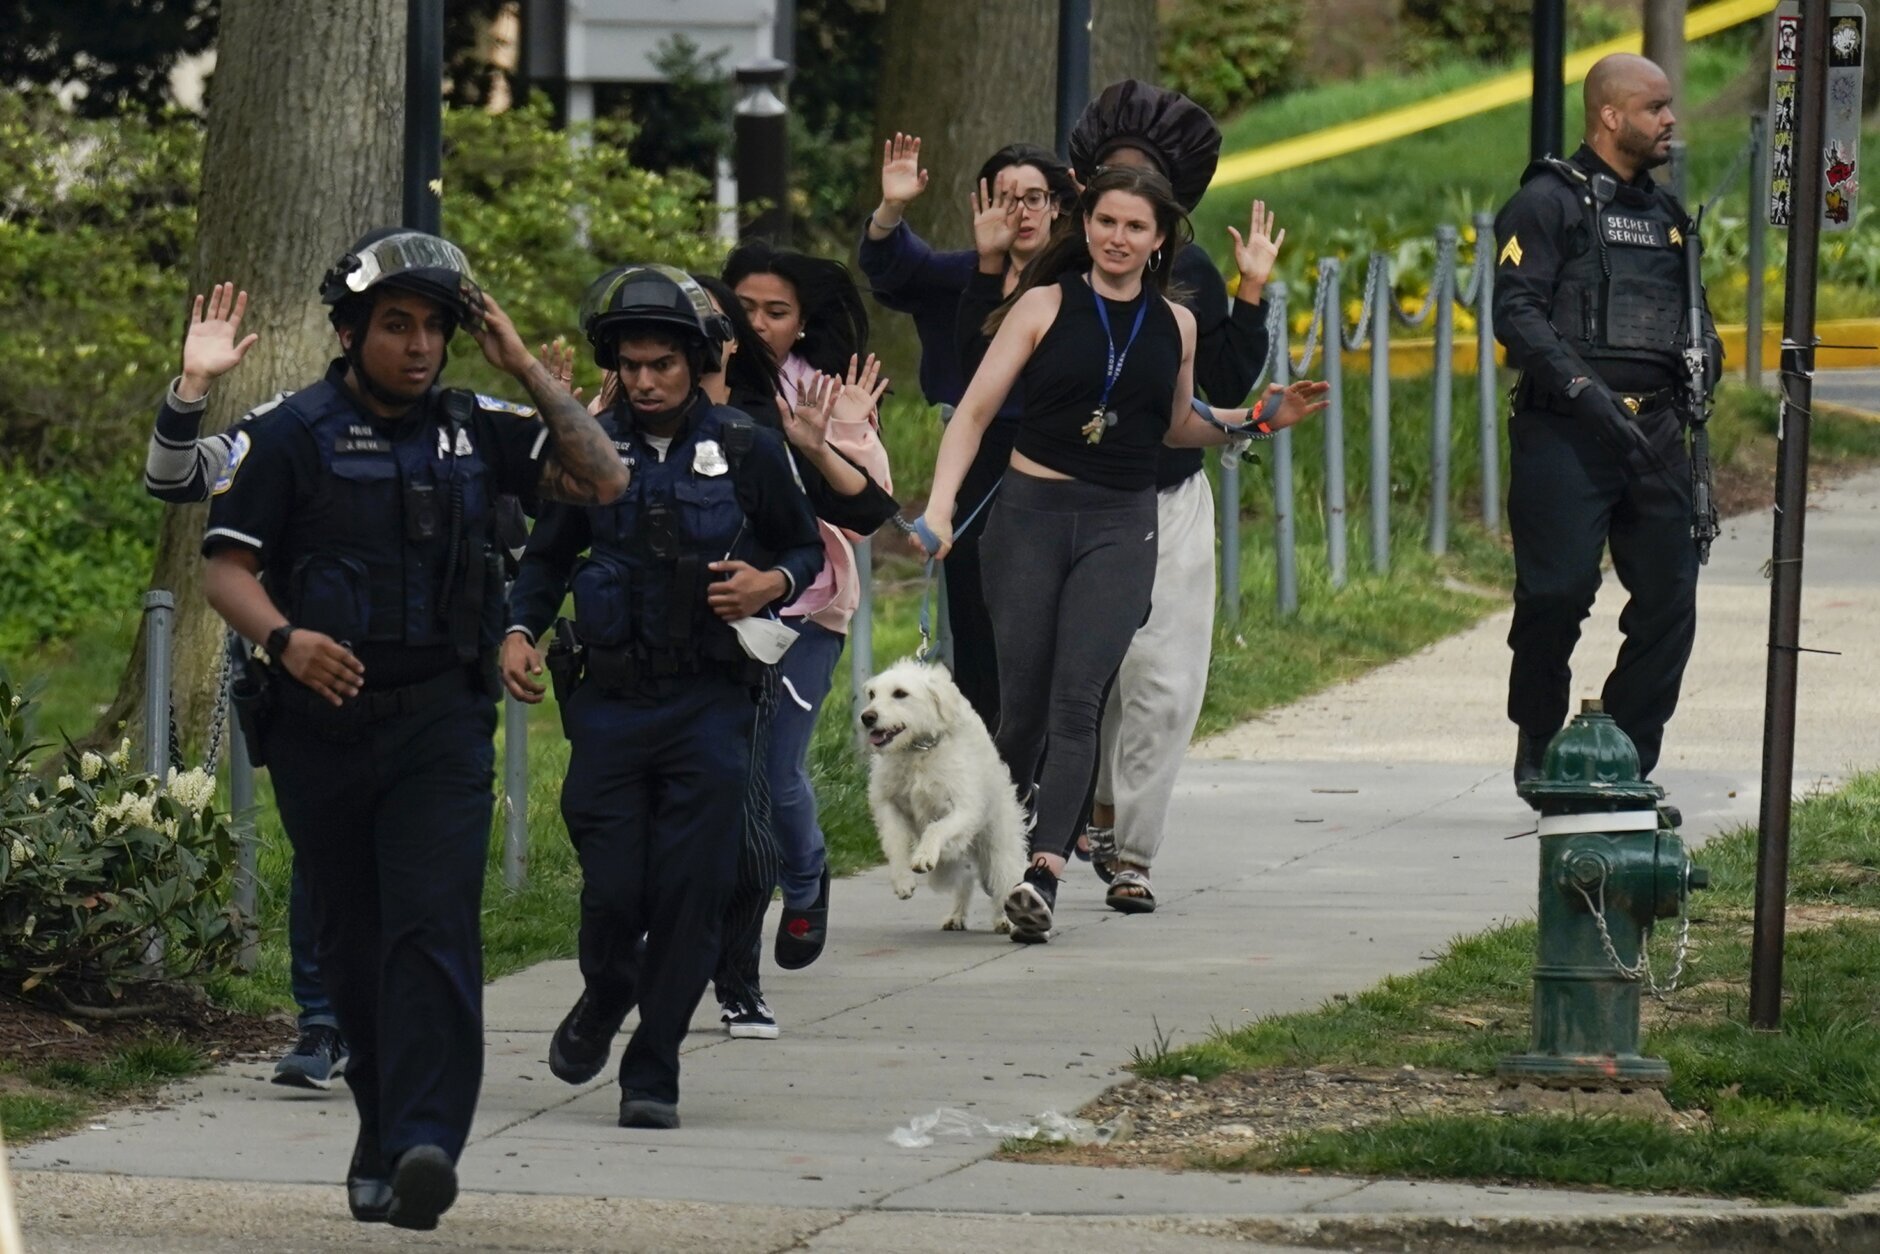 Police evacuate people, including Sarah Cope running with her dog, near the scene of a shooting Friday, April 22, 2022, in northwest Washington. Police say at least three people were injured in a shooting and city officials are warning people in the area to stay inside because of an "active threat." Dozens of law enforcement officers responded to the scene near Connecticut Avenue and Van Ness St. in the Van Ness neighborhood of Washington. (AP Photo/Carolyn Kaster)